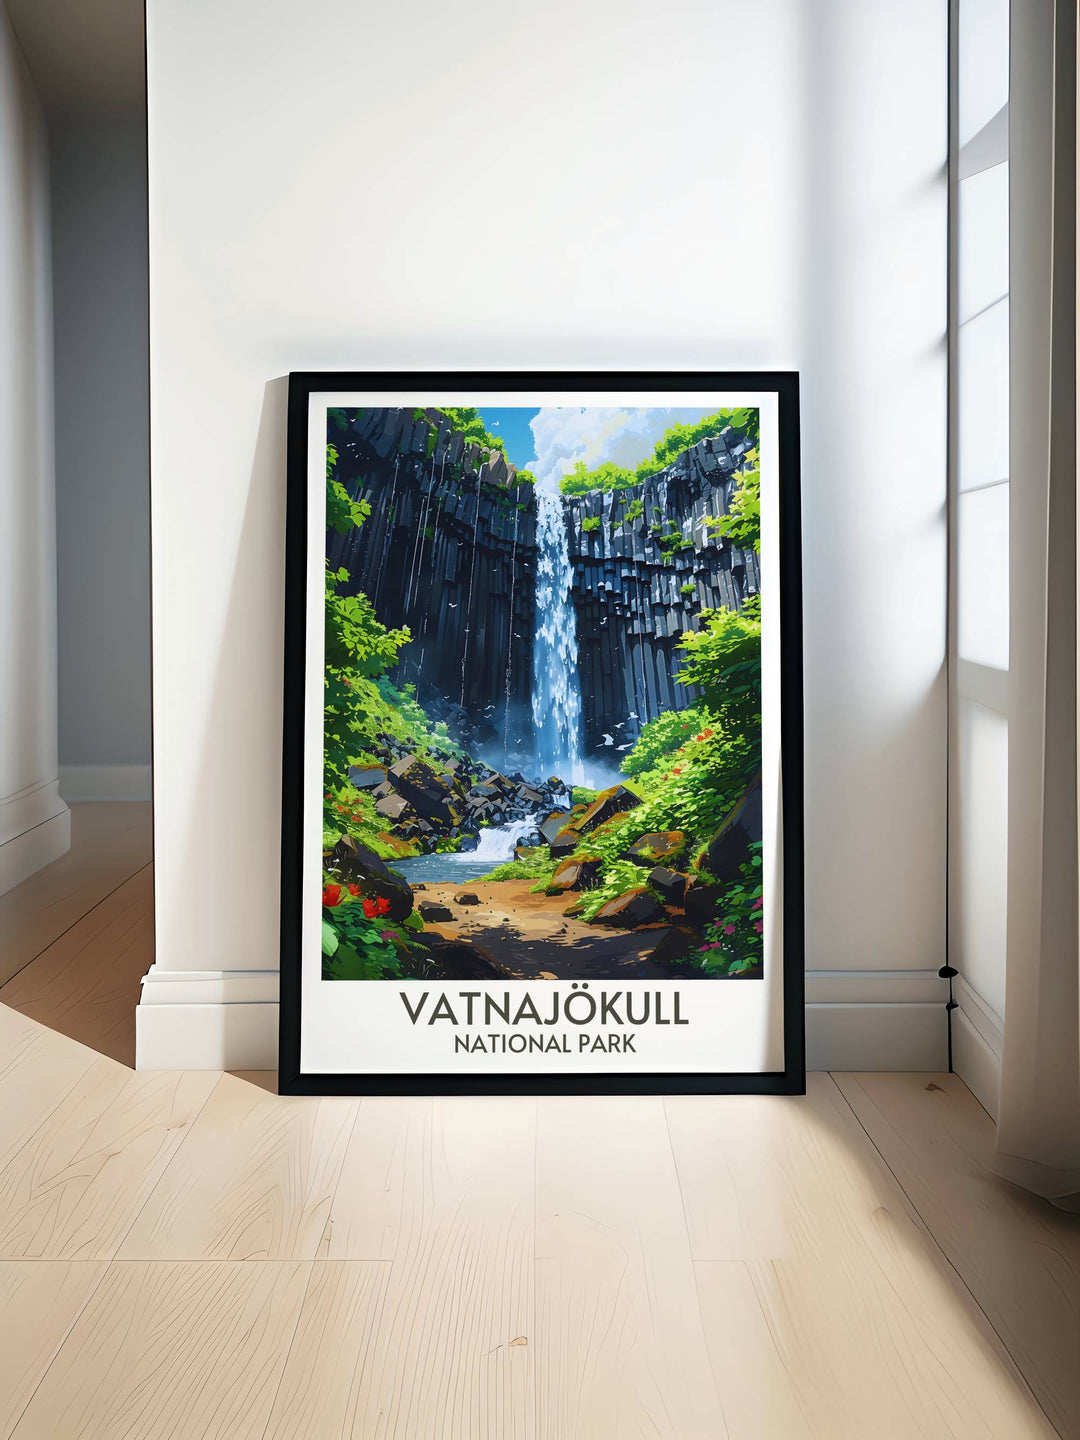 Fine art print of Svartifoss Waterfall in Vatnajökull National Park capturing the stunning basalt columns and cascading water perfect for adding Icelandic beauty to any home or office decor.